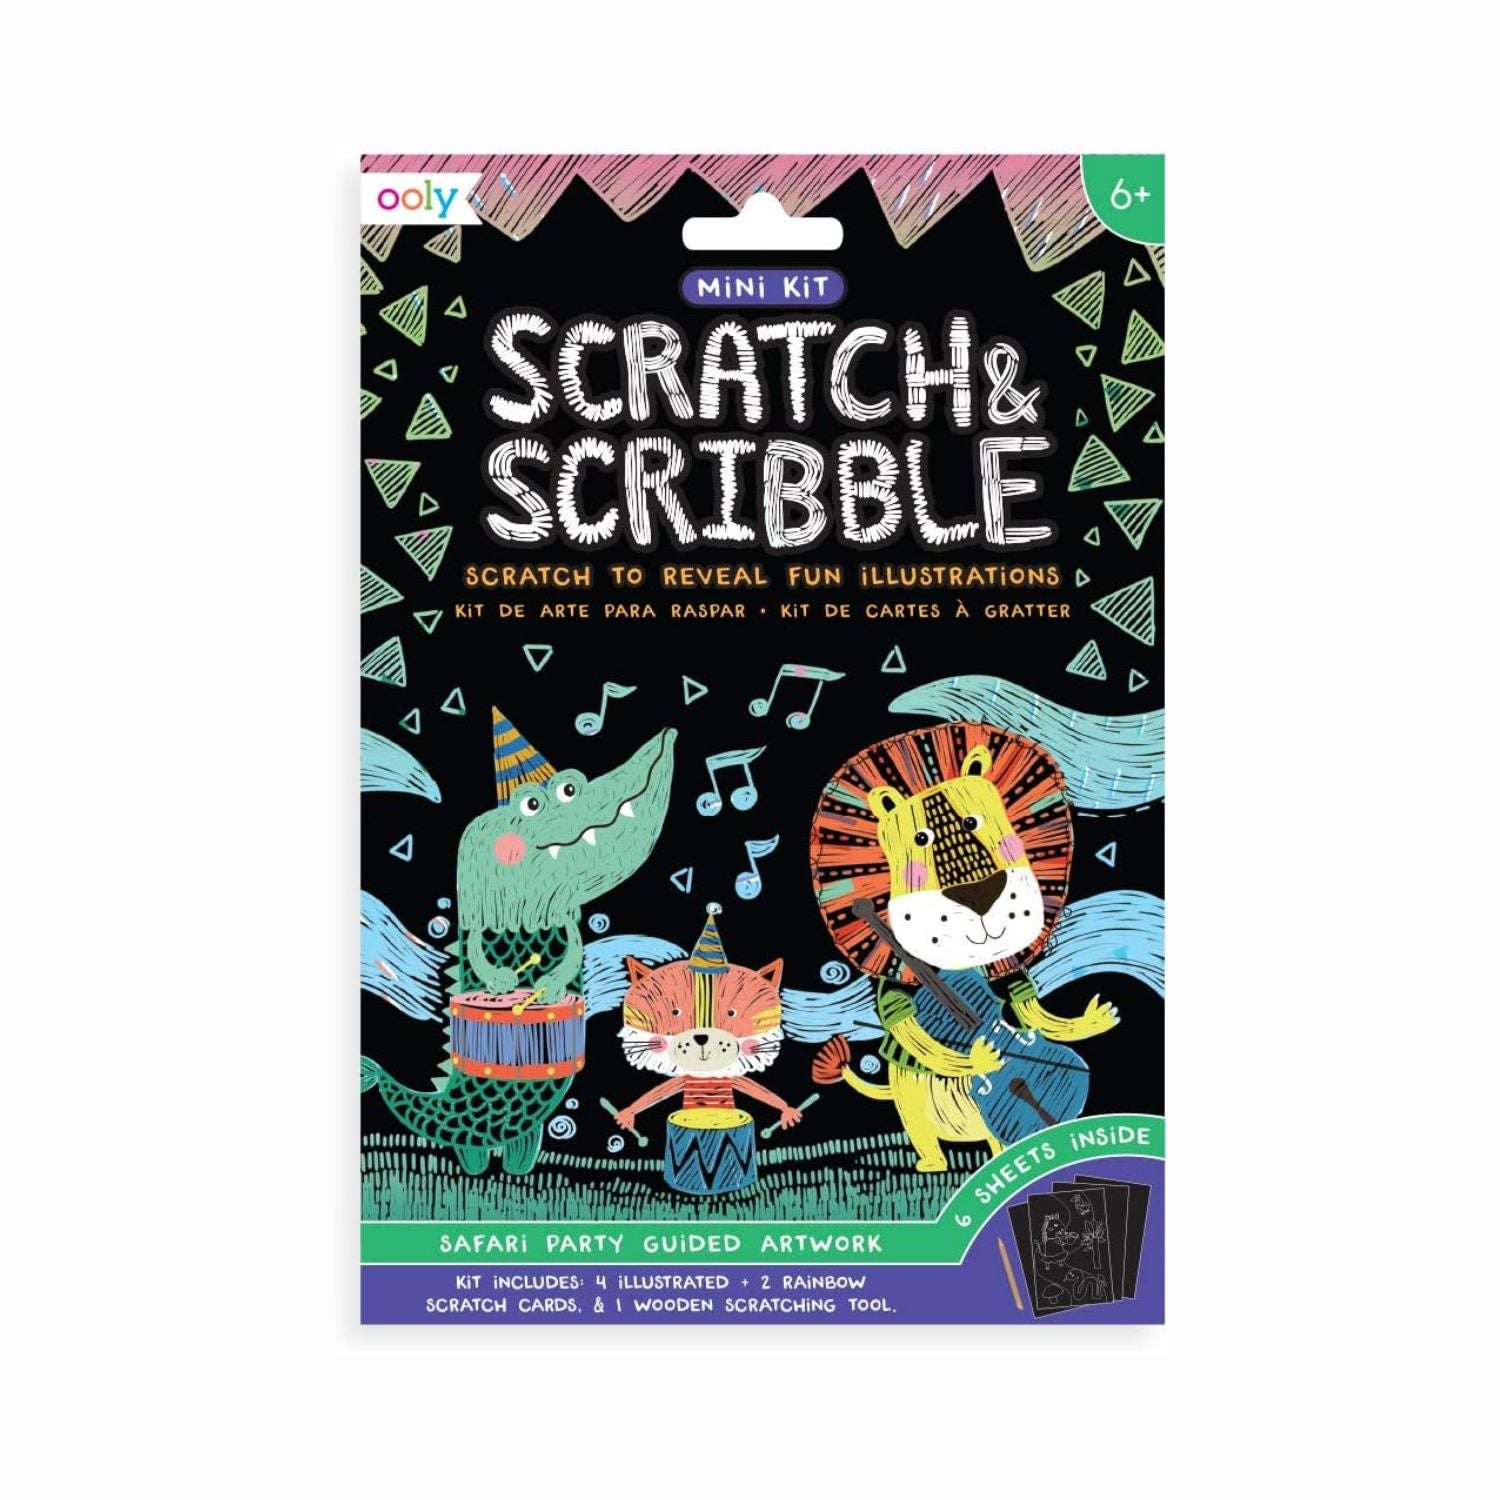 OOLY Mini Scratch and Scribble Art Kit - Safari Party